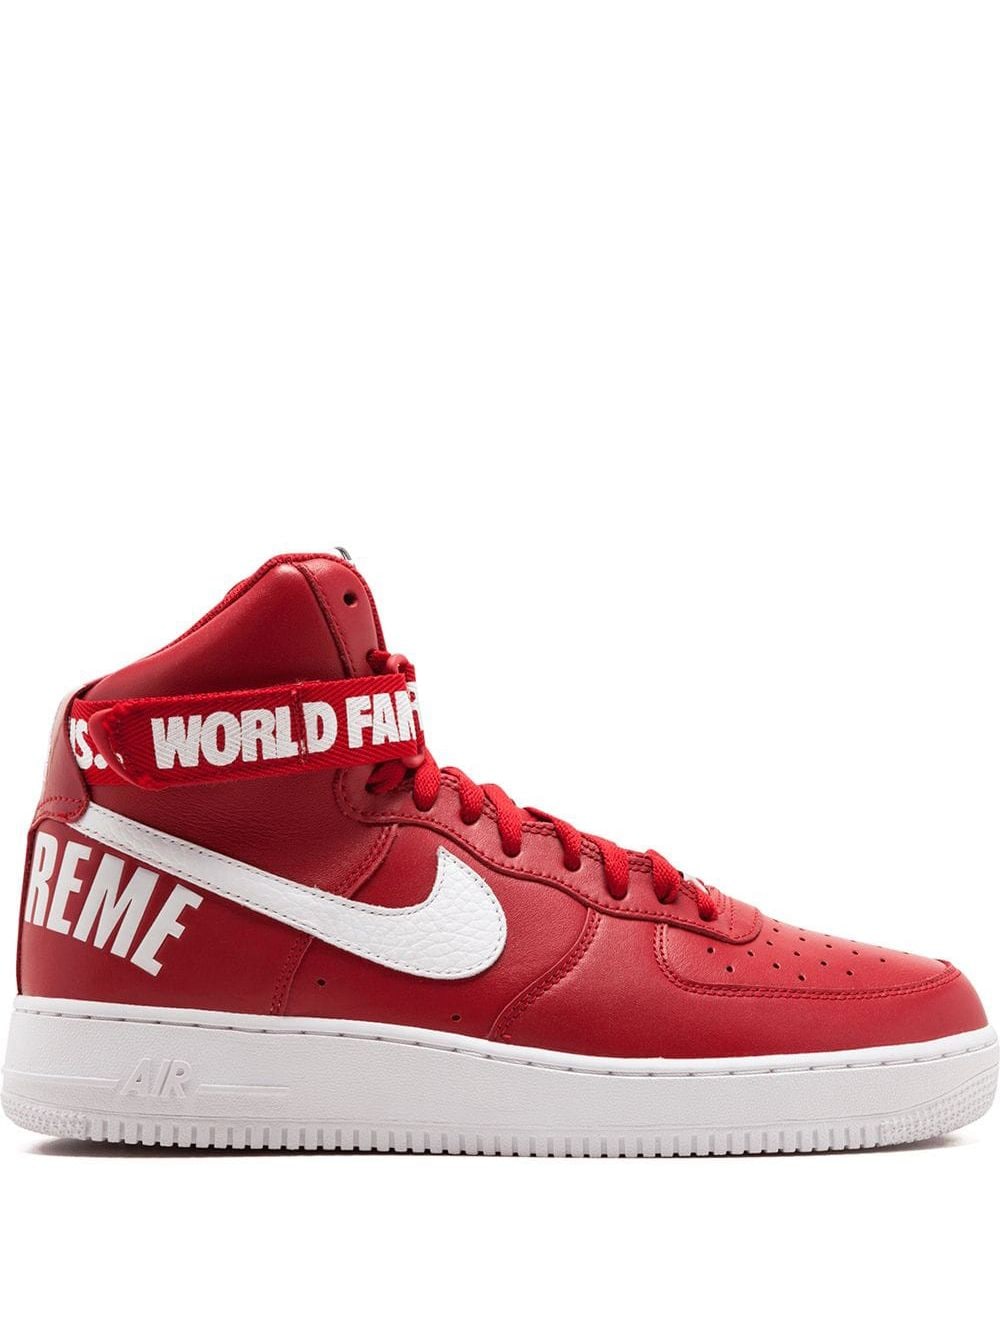 Nike x Supreme Air Force 1 High sneakers - Red von Nike